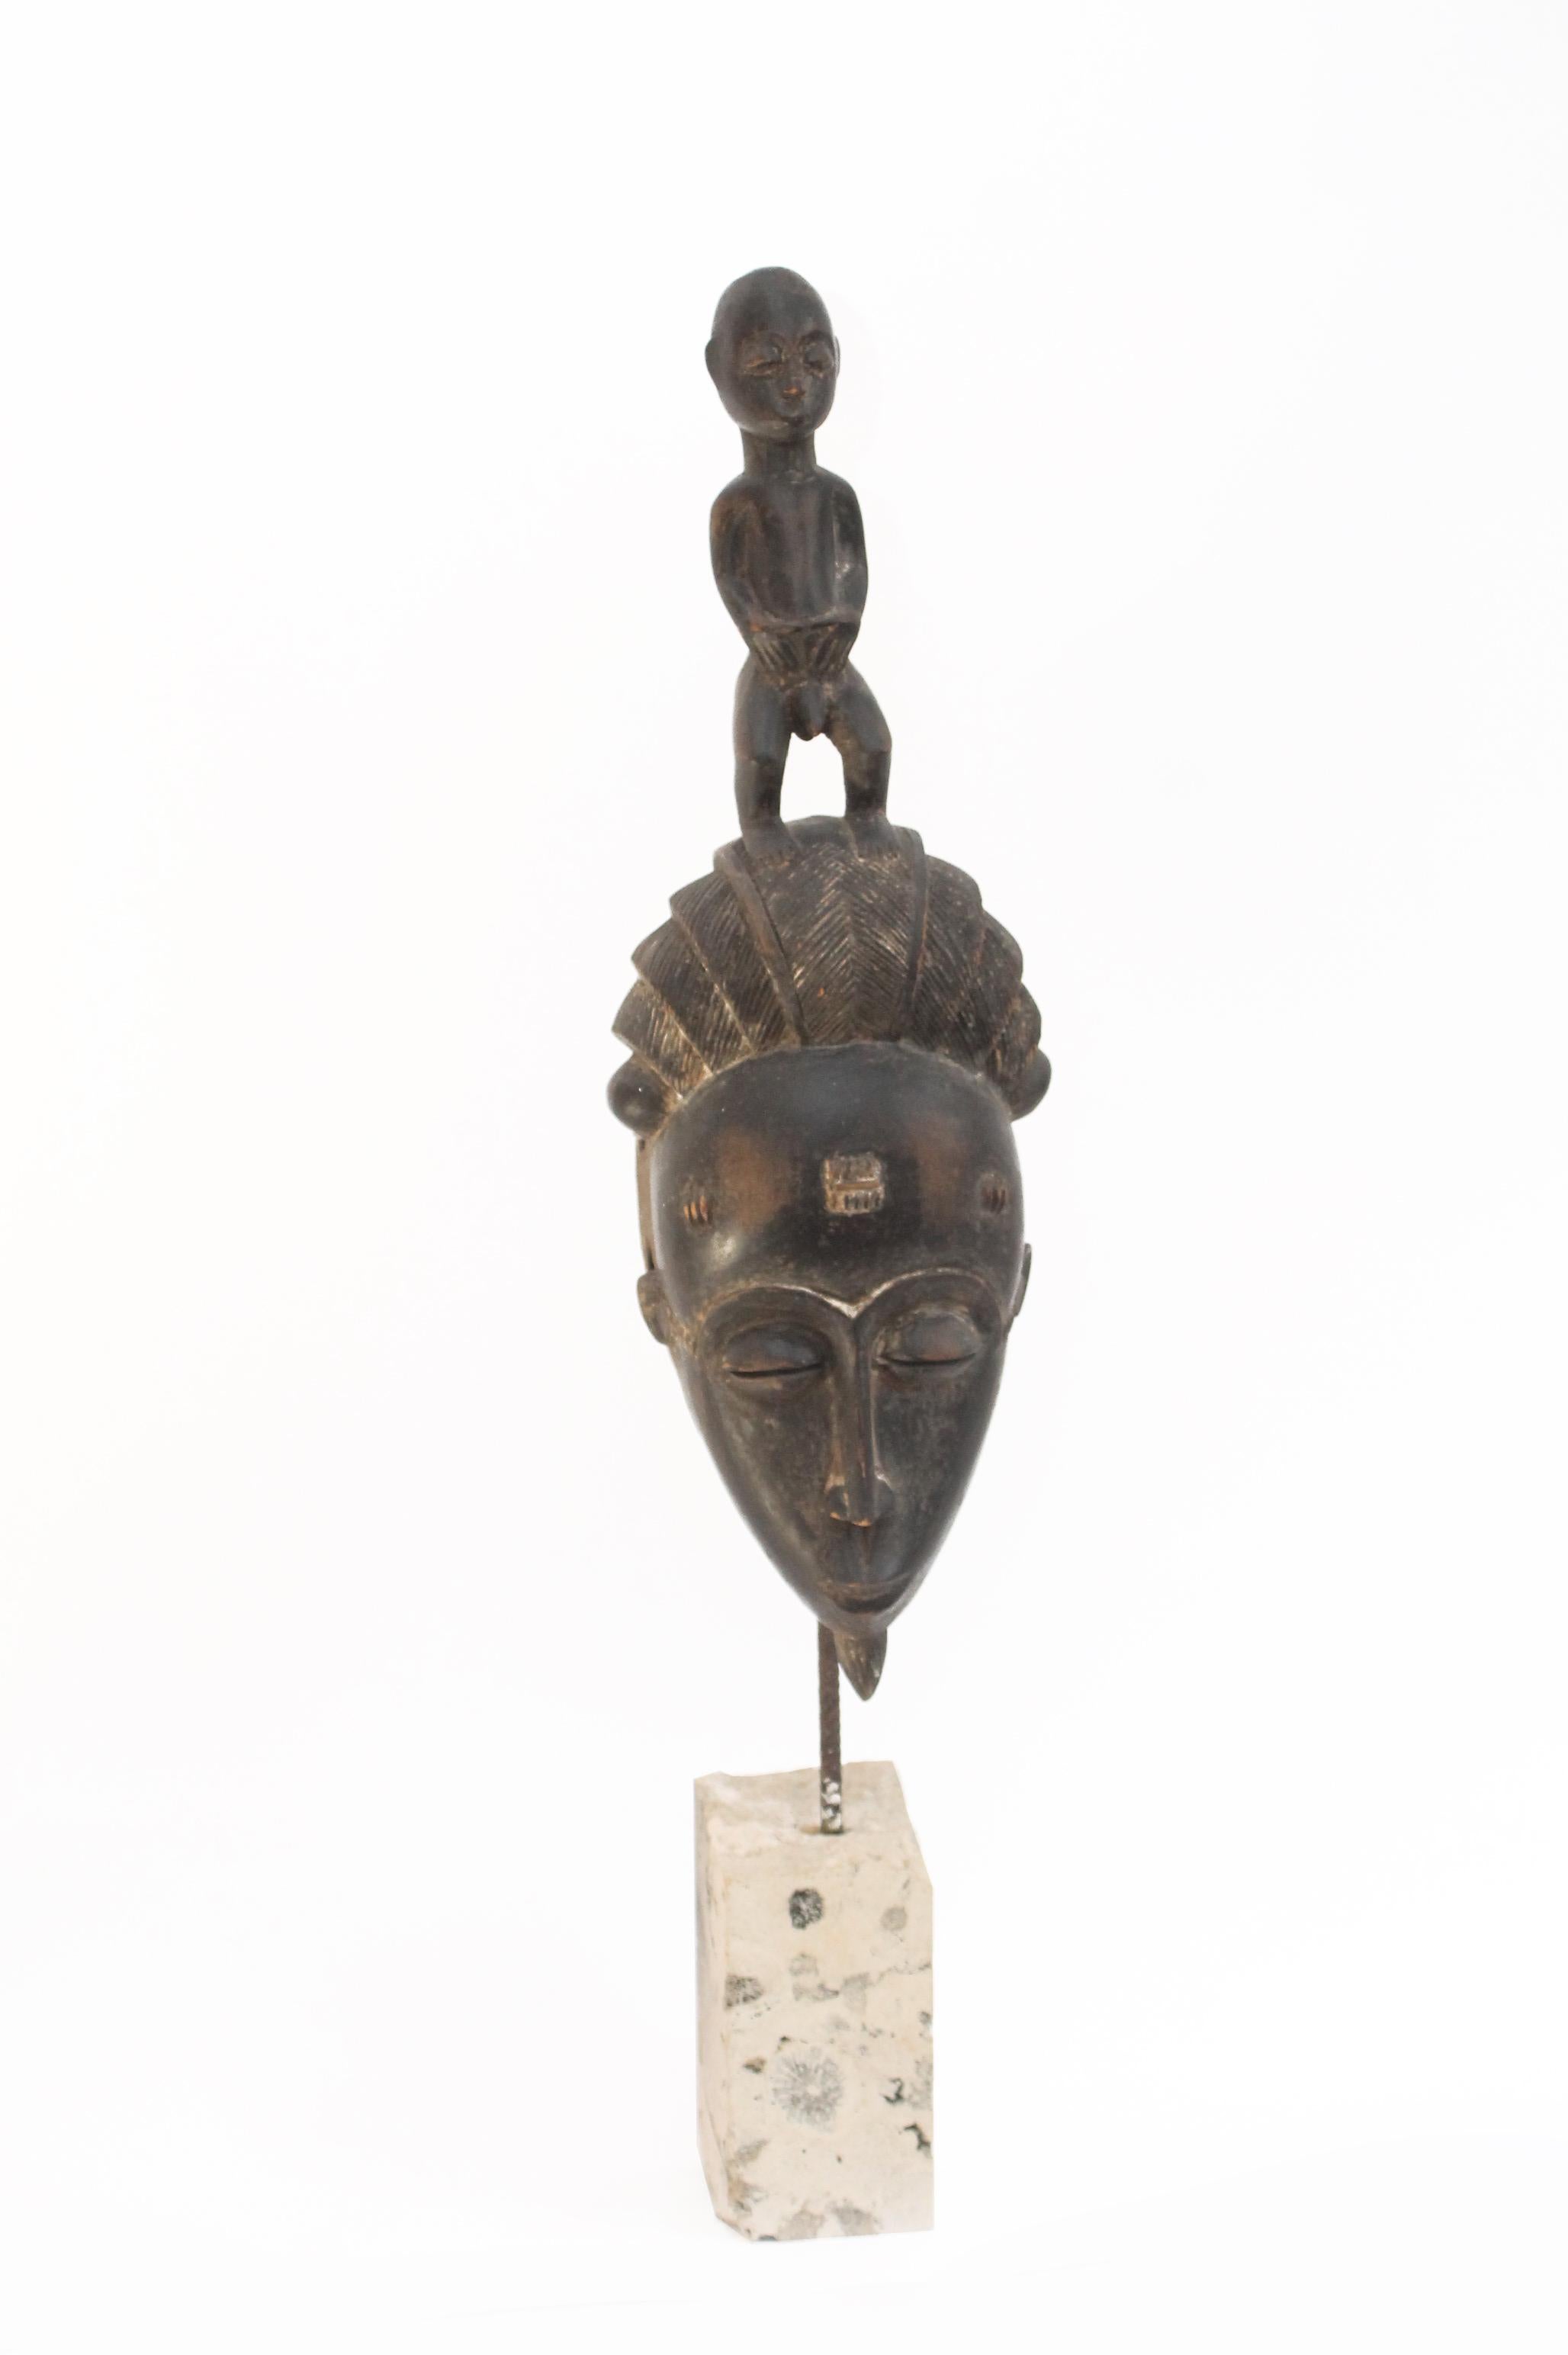 Hand-Carved Baoule' African Mask  Mid-century (71x15x13cm) with Floridian coral pedestal